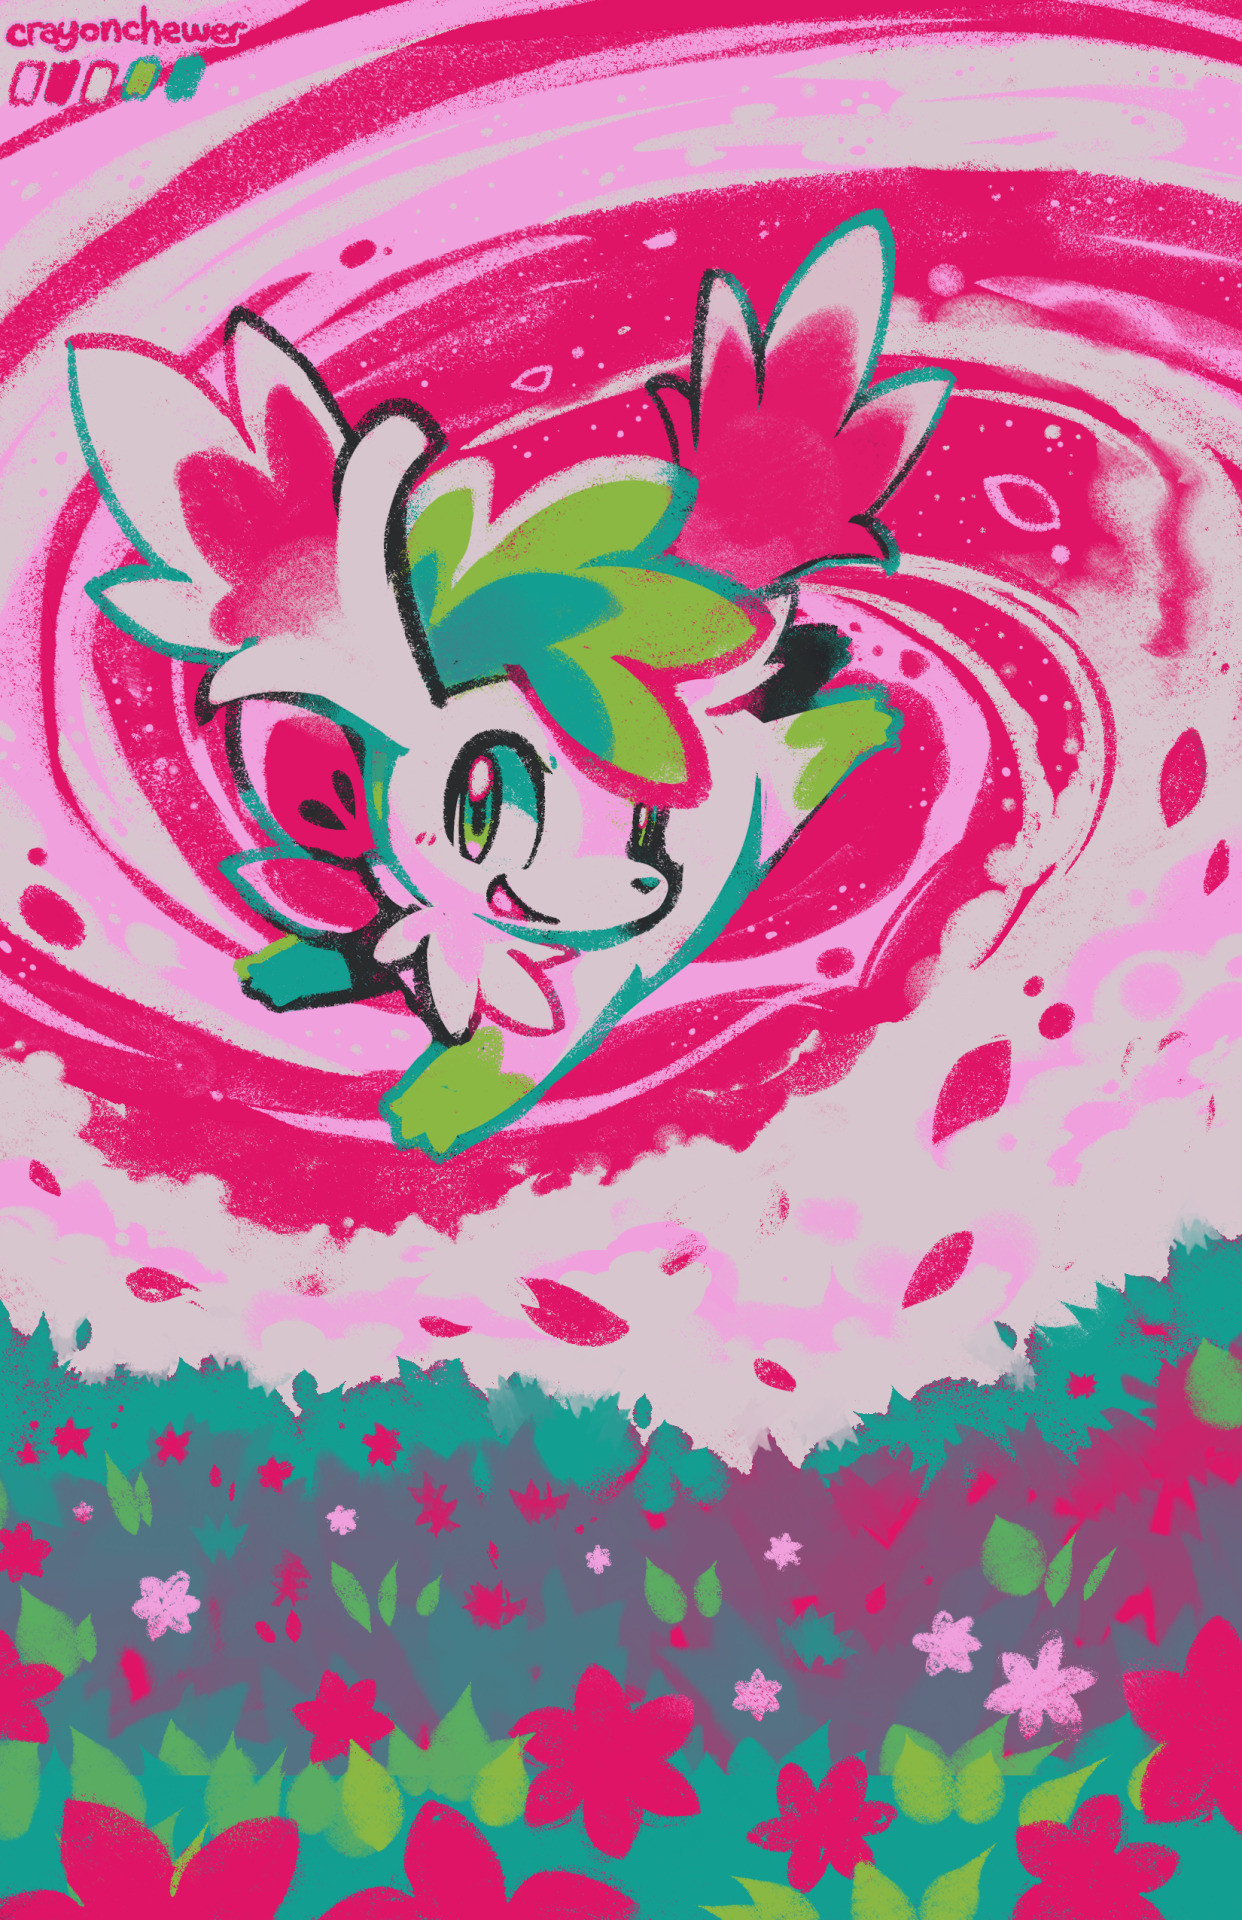 1242x1920 crayonchewer: Even delicate flowers can hold great strength within! á¦(ï½ï¼¾Â´)á¤  Sky Forme Shaymin + palette Feel free to suggest more characters + palettes  ...